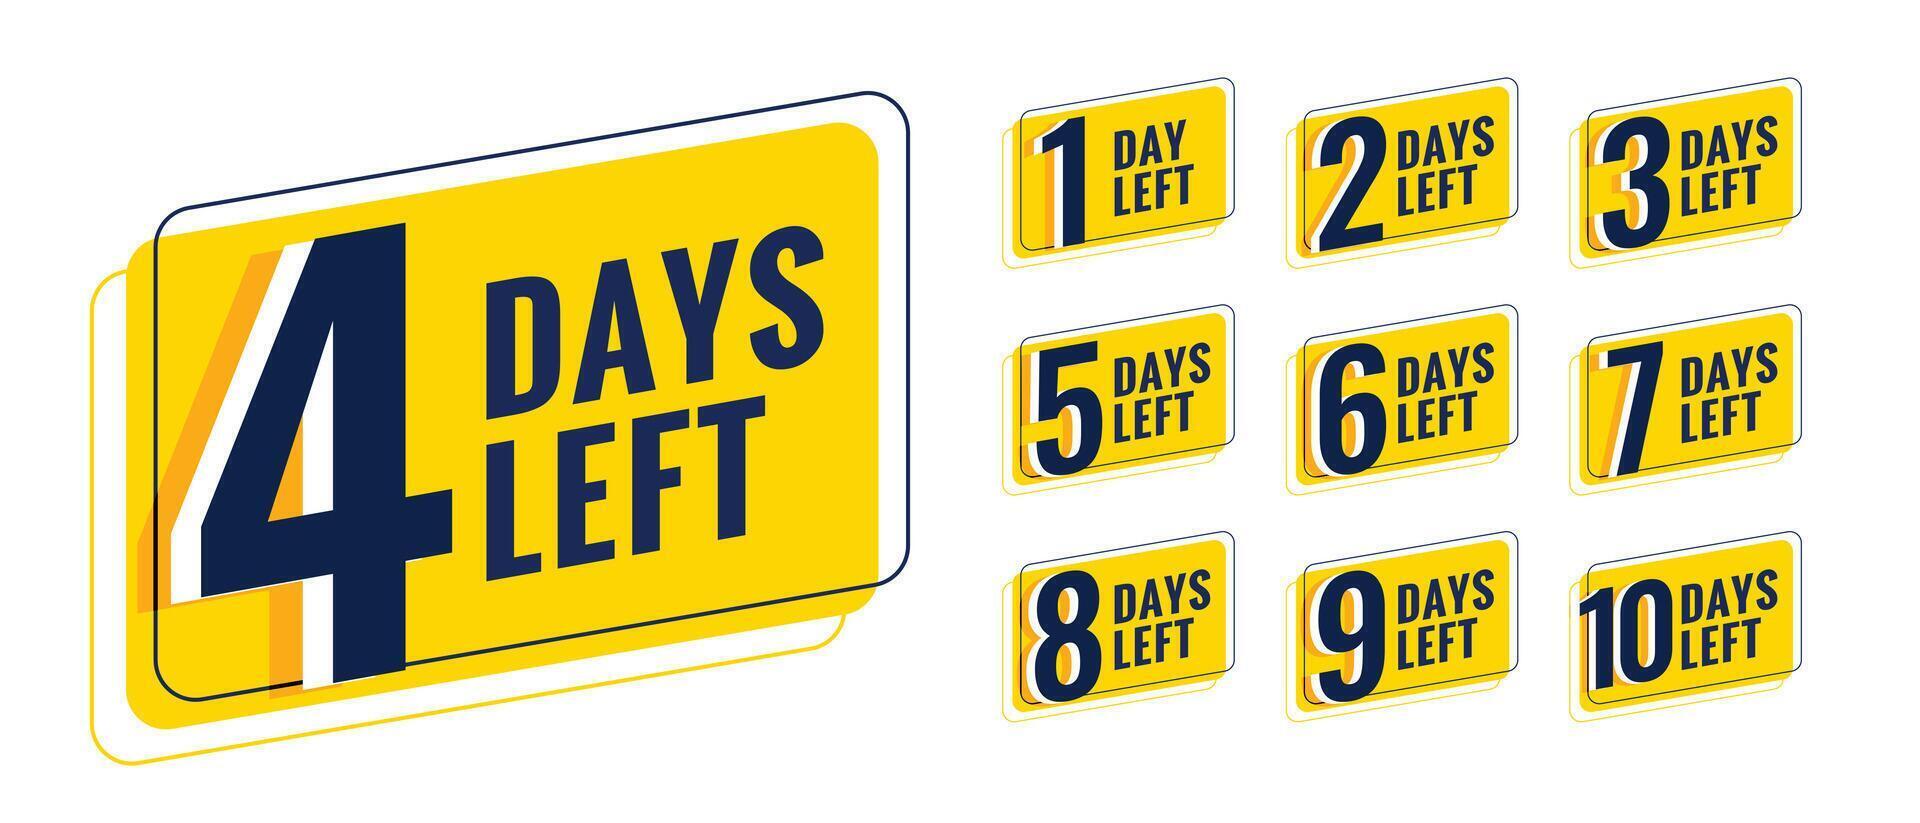 days left countdown timer banner for upcoming event vector